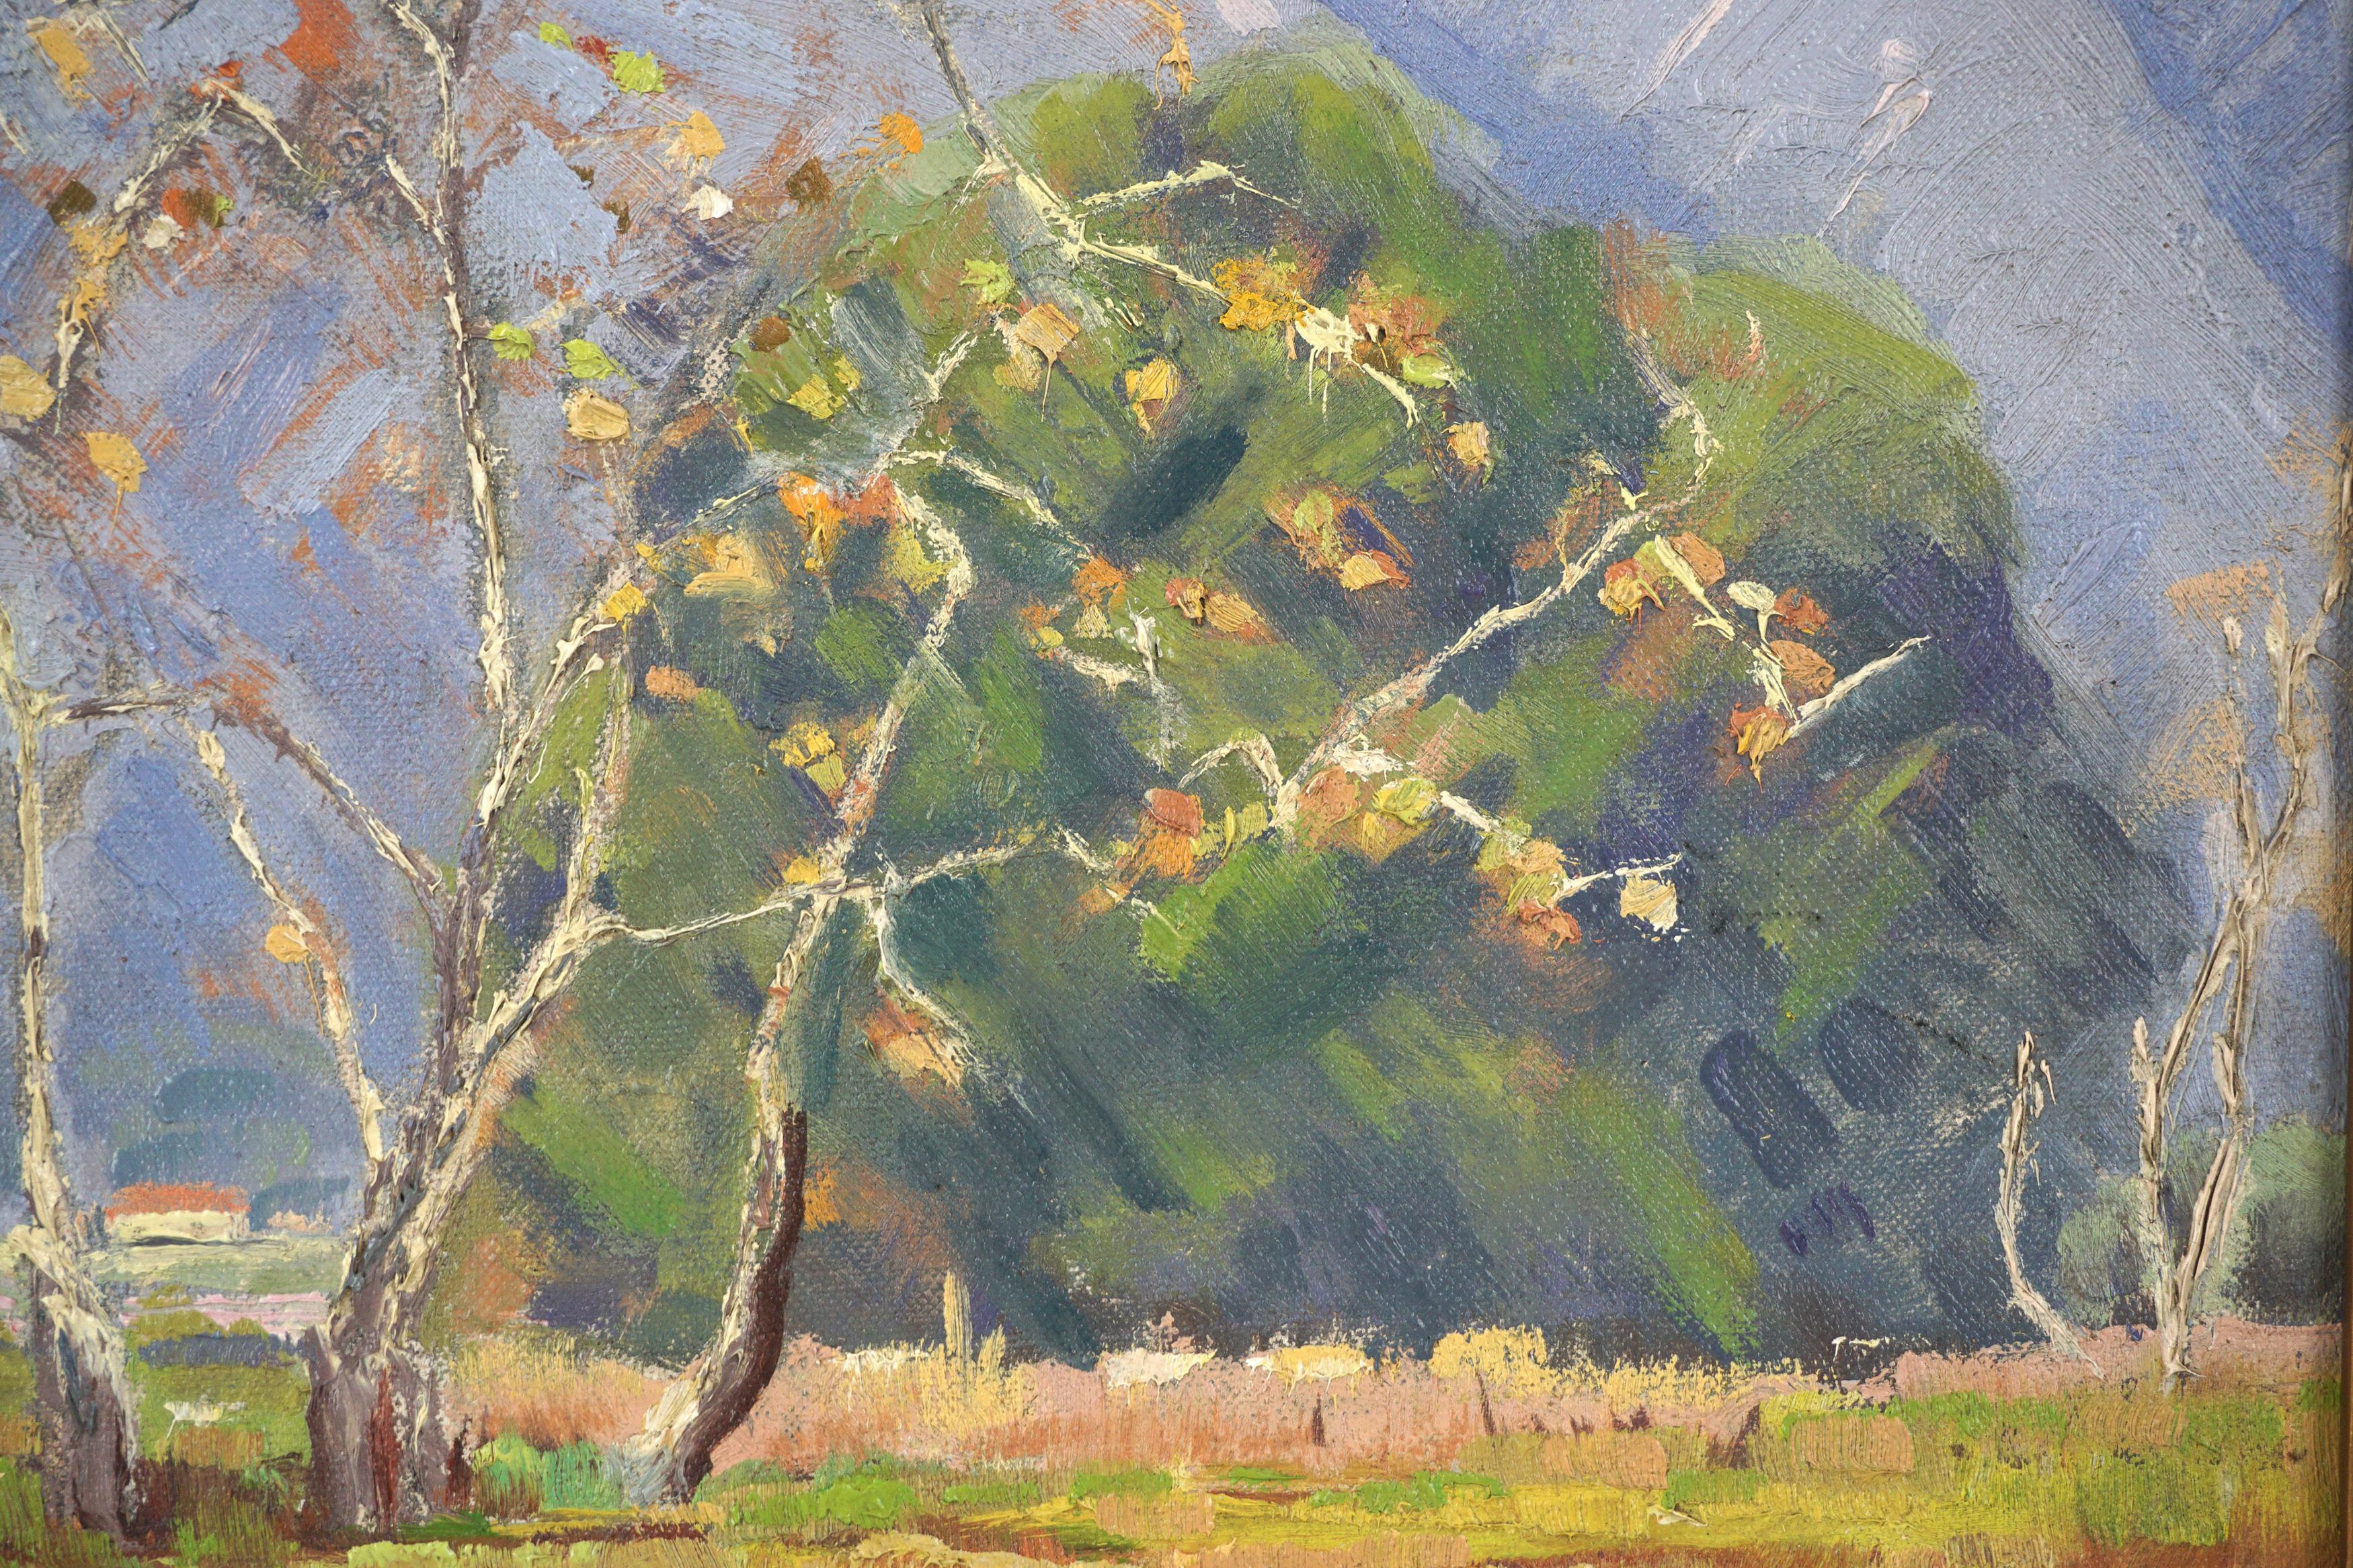 San Gabriel Mountains in Autumn Landscape California School 1930s - Brown Landscape Painting by Unknown